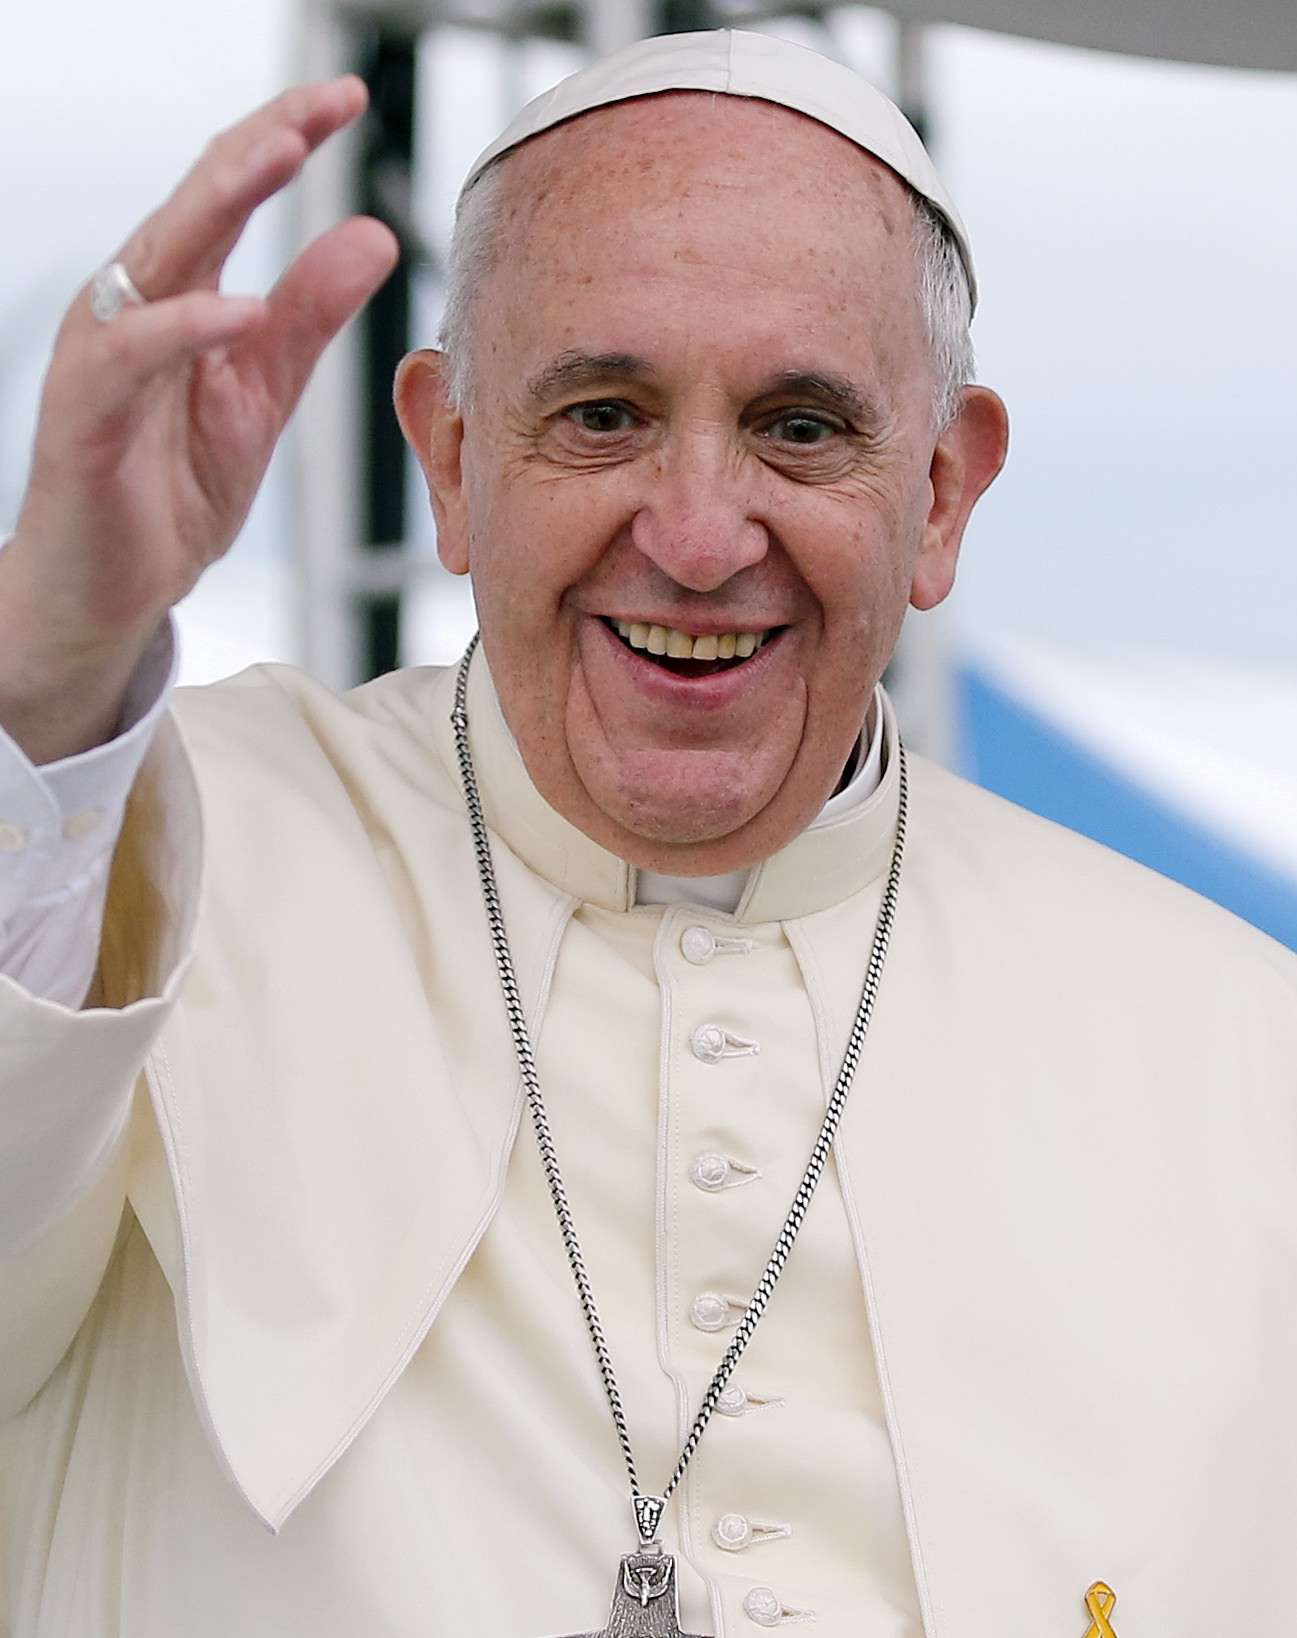 Pope Francis' Evangelii Gaudium: Work for Justice at Heart of